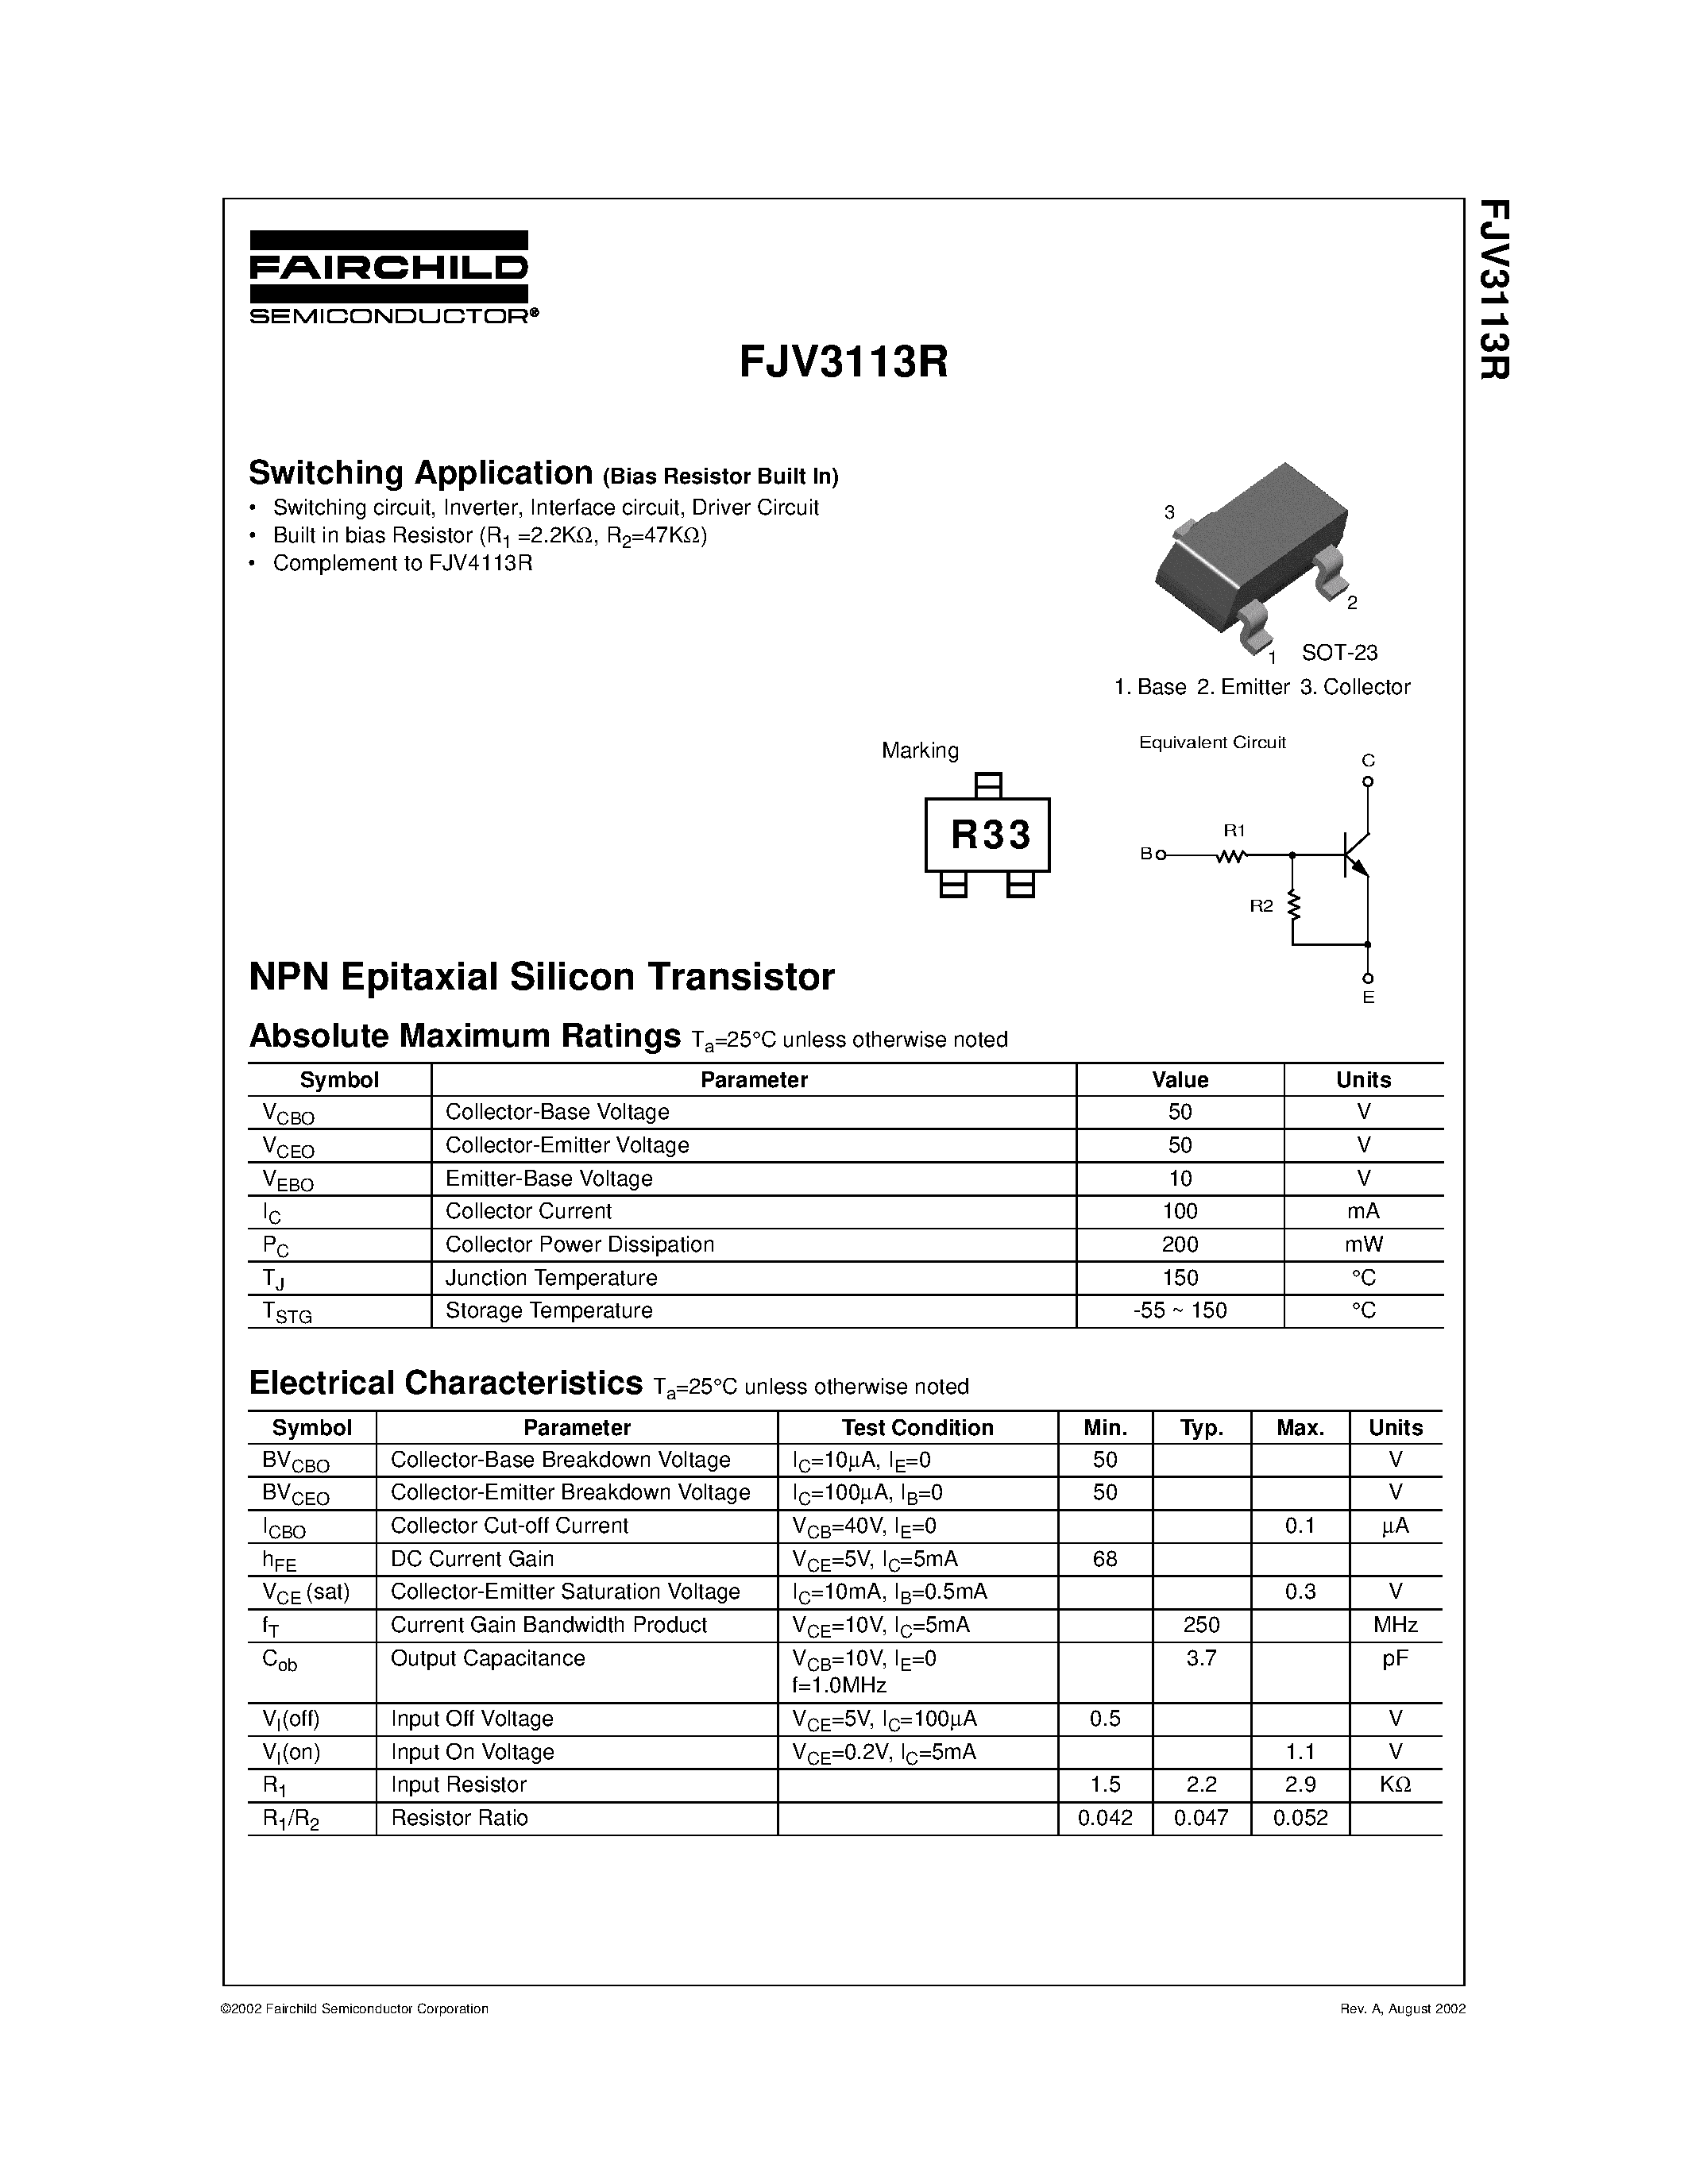 Datasheet FJV3113R - NPN Epitaxial Silicon Transistor page 1